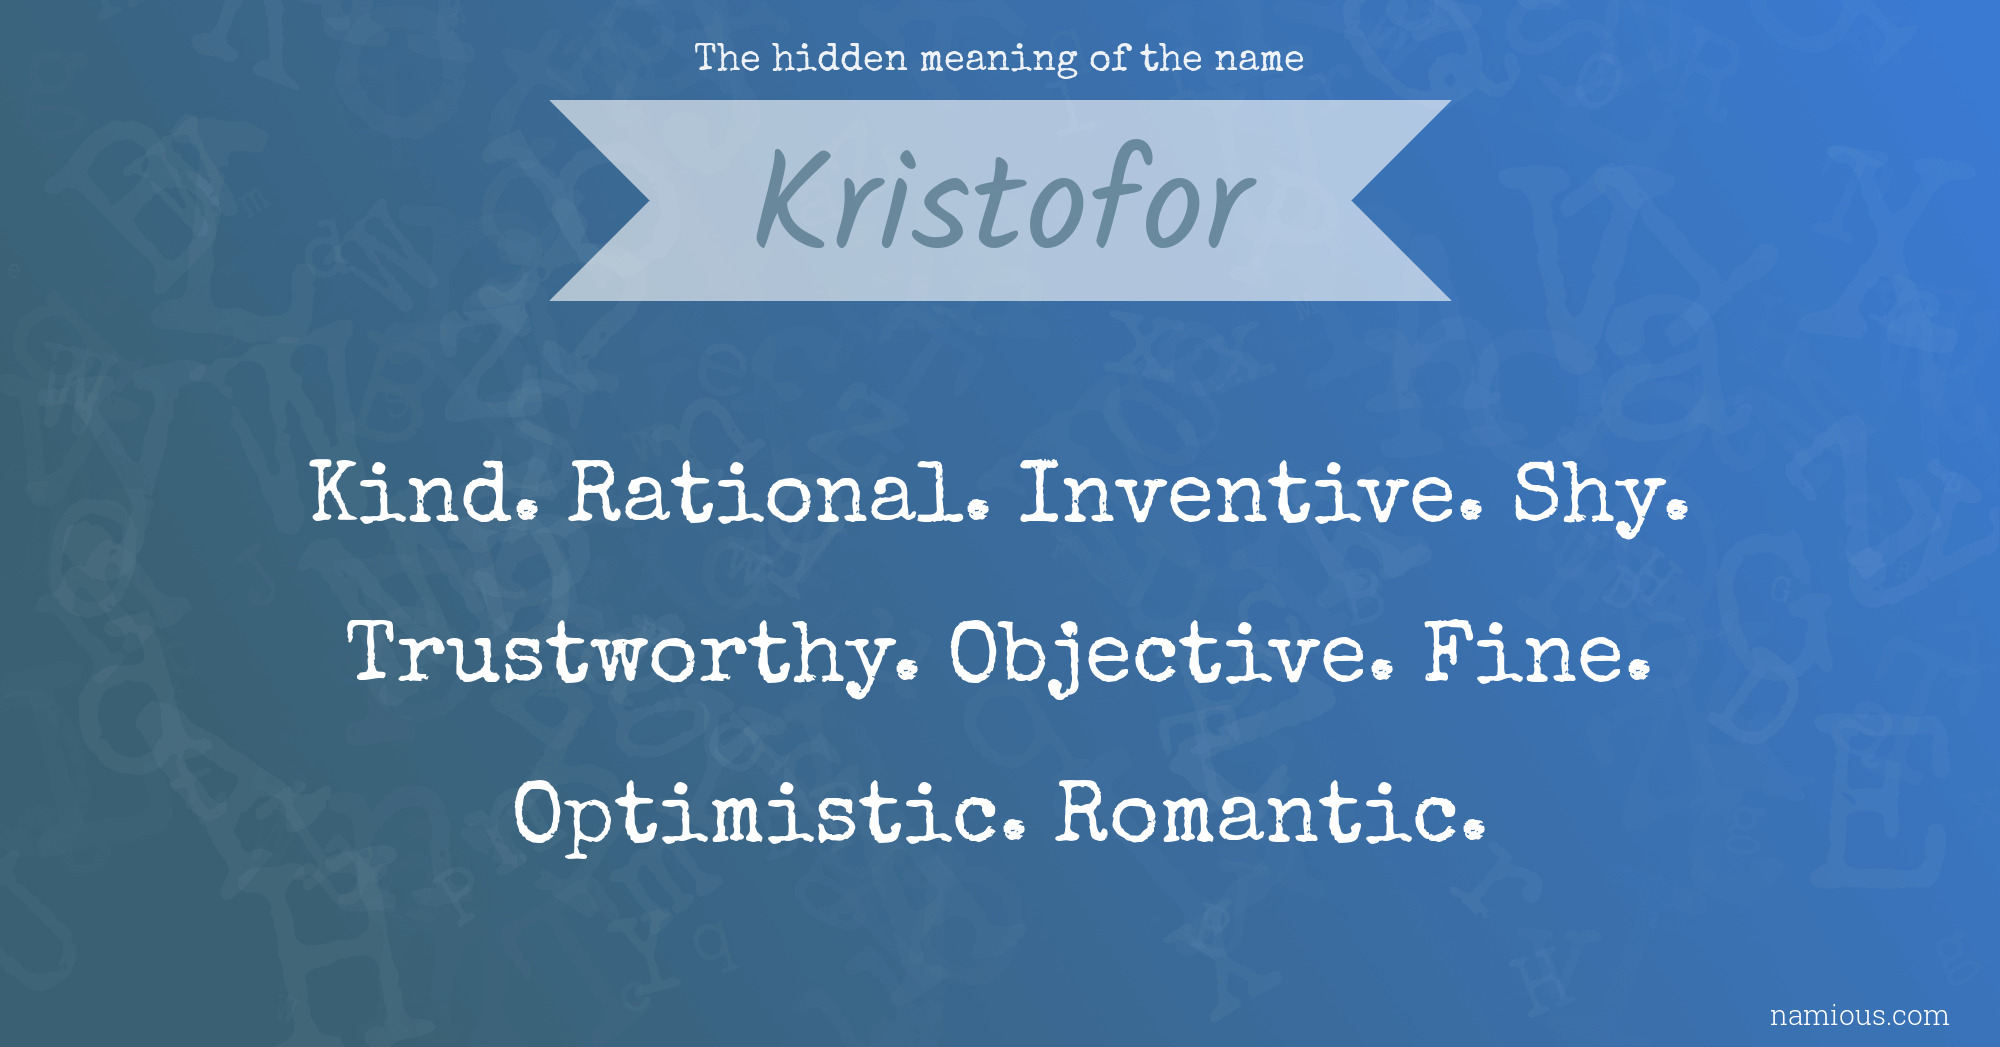 The hidden meaning of the name Kristofor